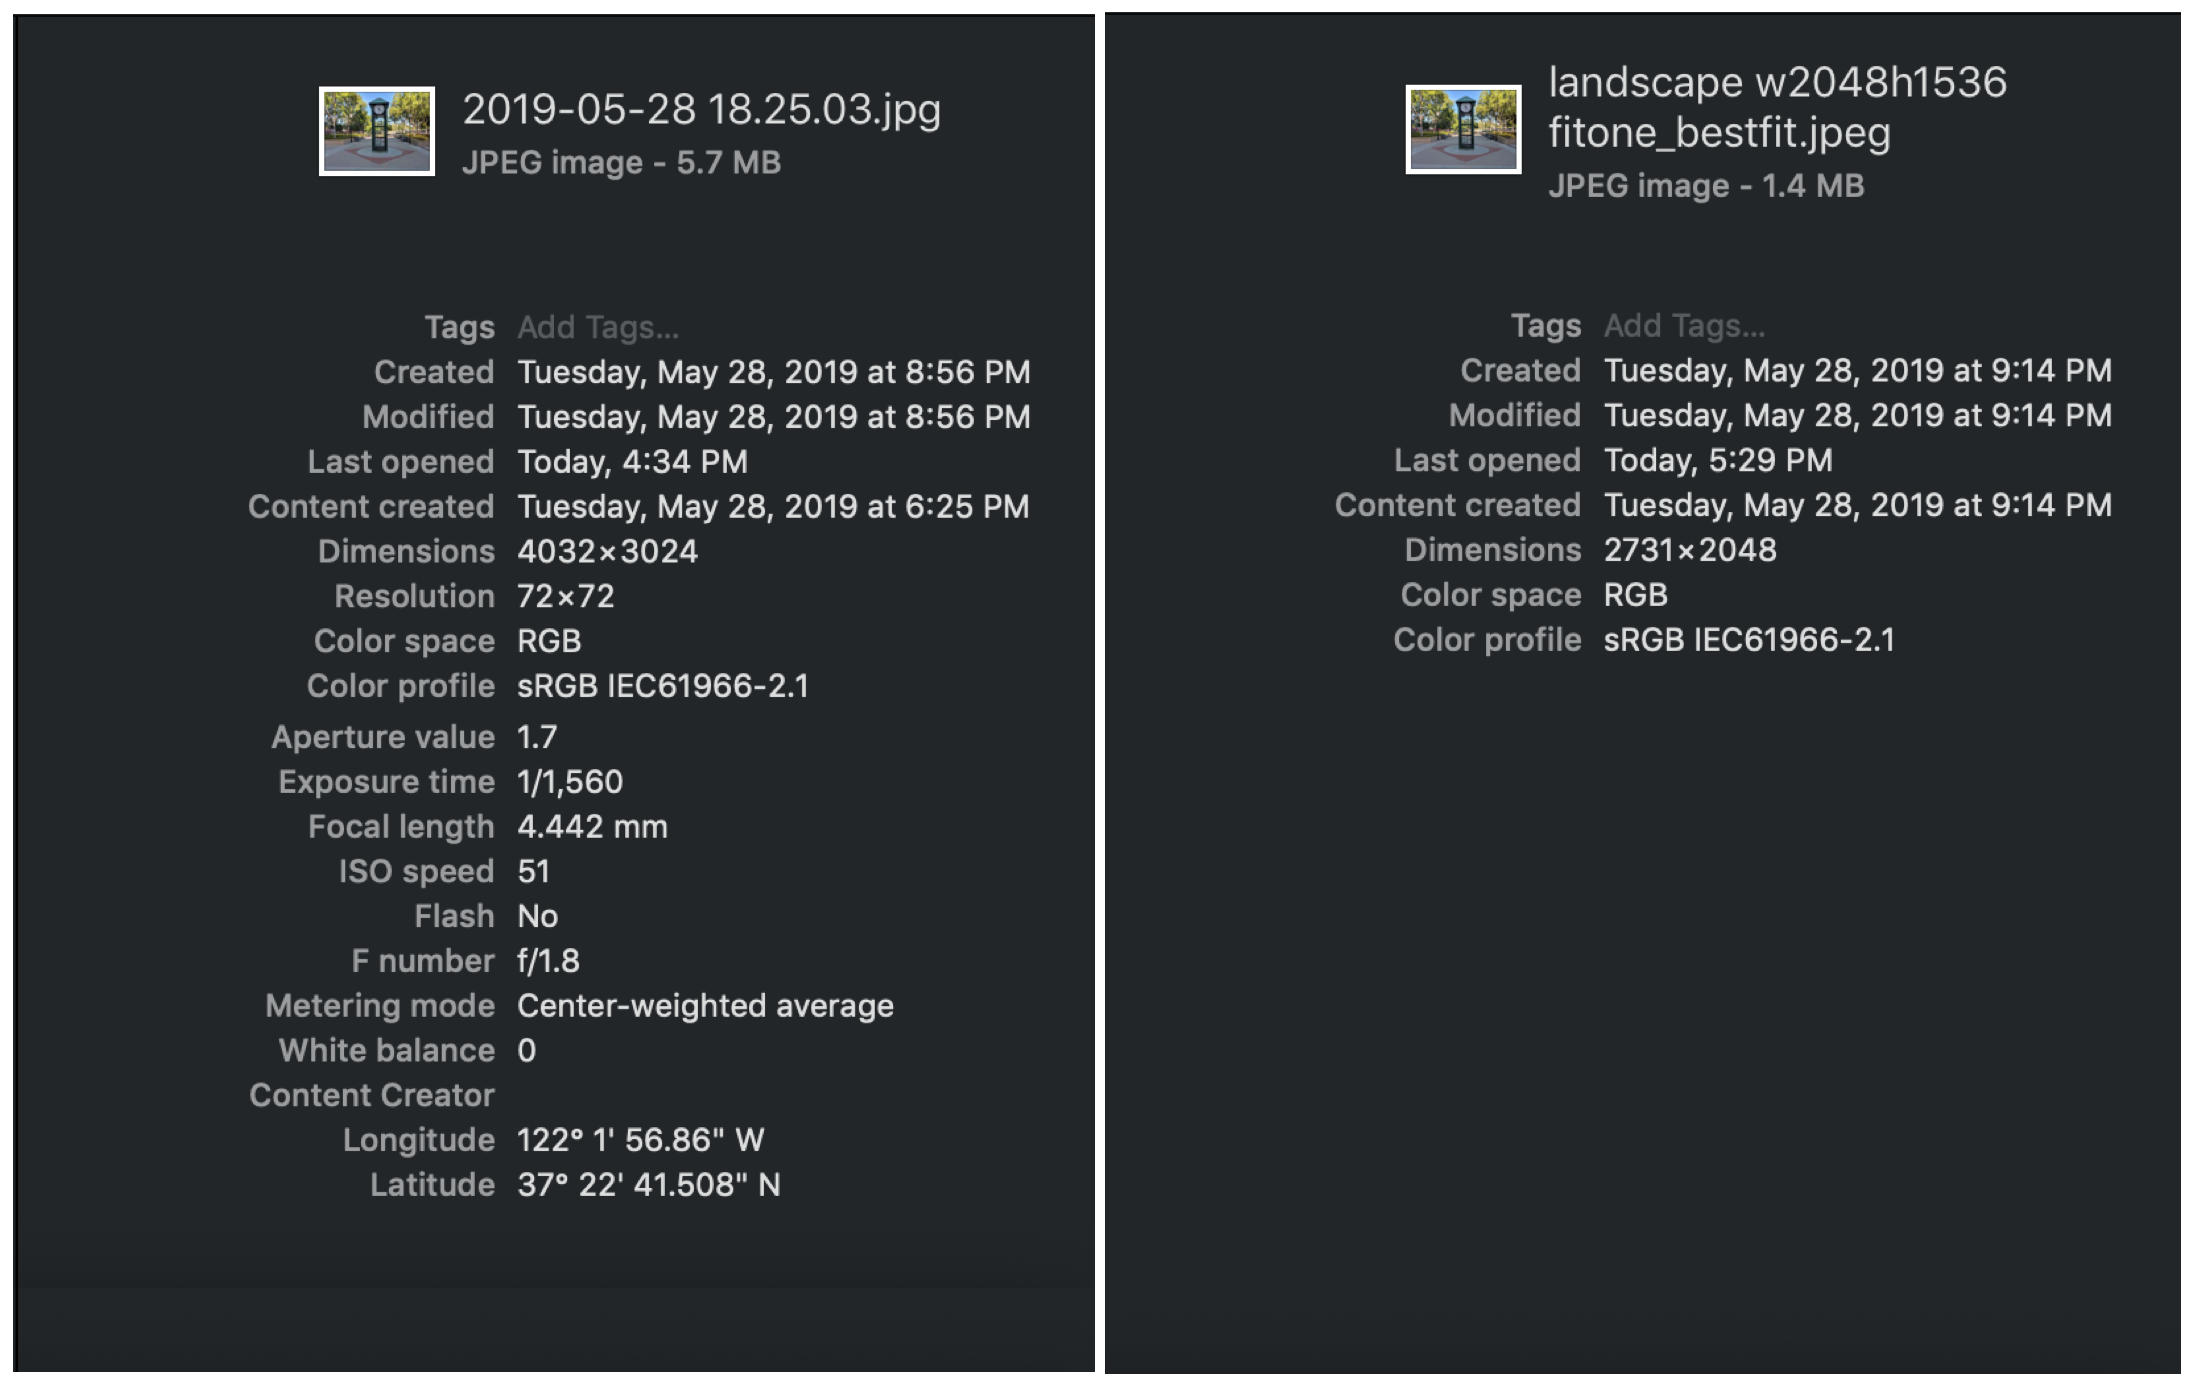 Image of metadata being compared for each photo